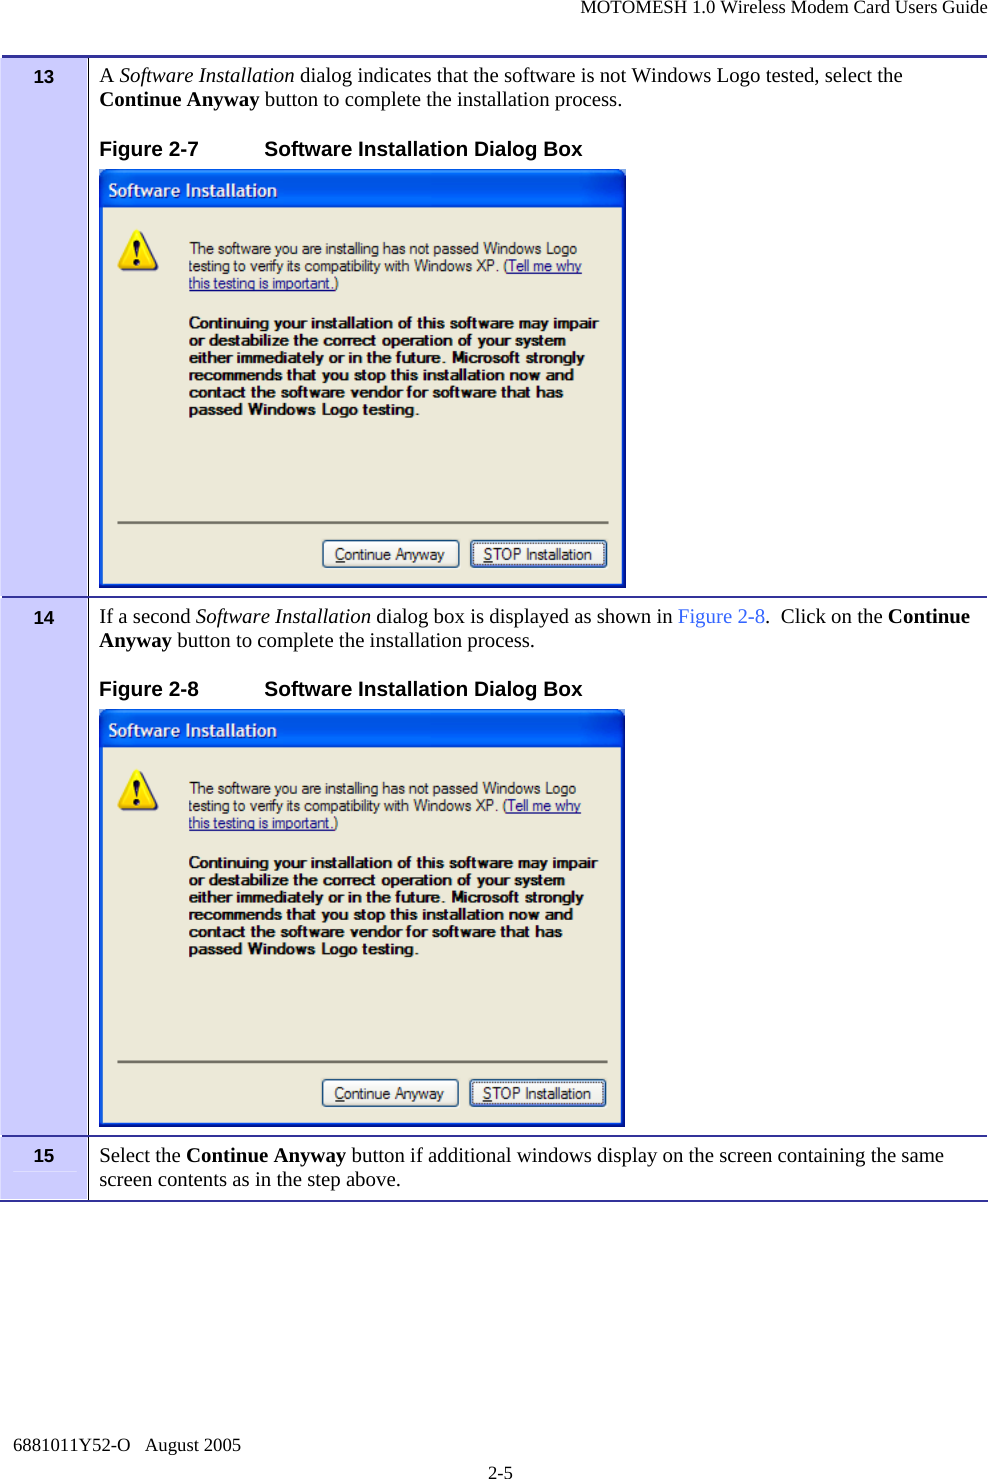 MOTOMESH 1.0 Wireless Modem Card Users Guide 6881011Y52-O   August 2005 2-5 13  A Software Installation dialog indicates that the software is not Windows Logo tested, select the Continue Anyway button to complete the installation process.  Figure 2-7  Software Installation Dialog Box  14  If a second Software Installation dialog box is displayed as shown in Figure 2-8.  Click on the Continue Anyway button to complete the installation process. Figure 2-8  Software Installation Dialog Box  15  Select the Continue Anyway button if additional windows display on the screen containing the same screen contents as in the step above. 